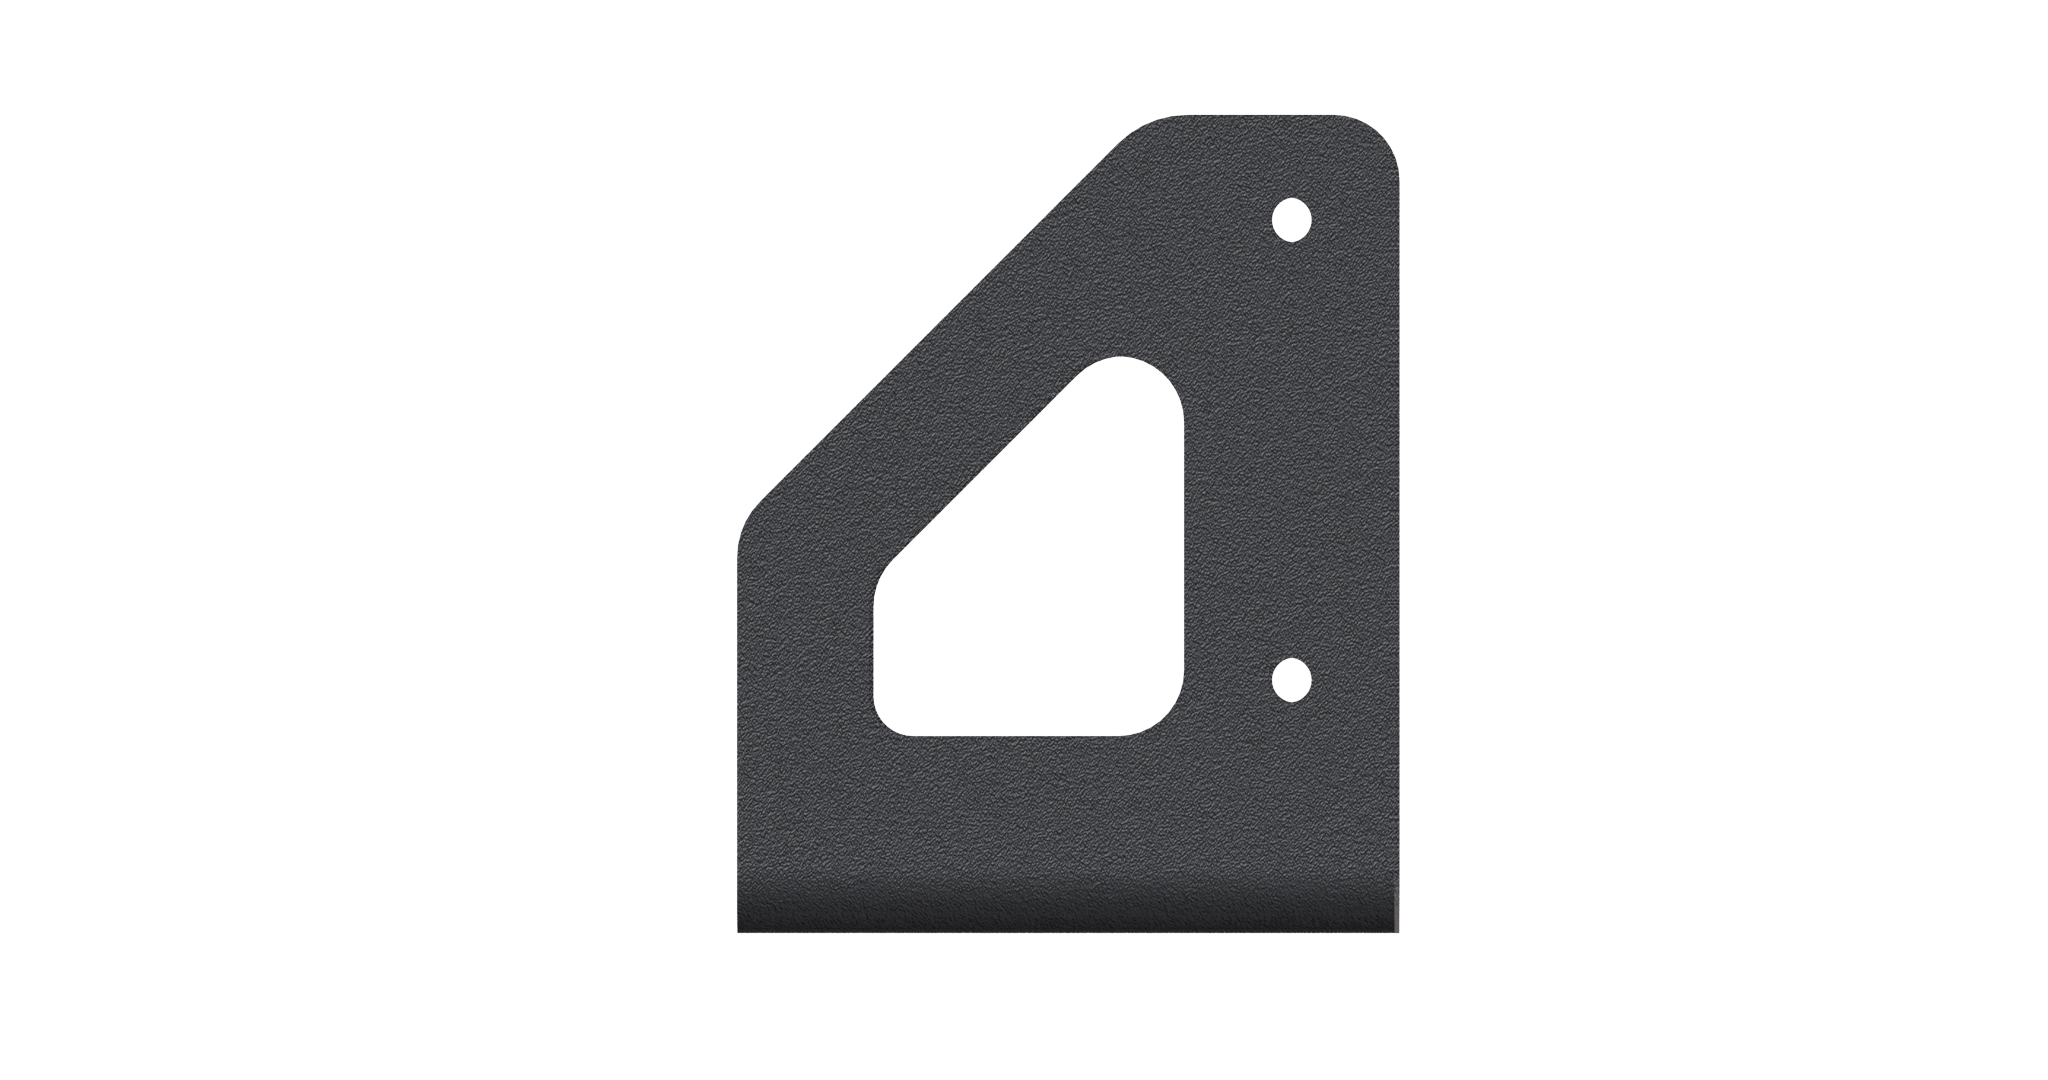 X1-GT MOZA PLATE ADAPTER